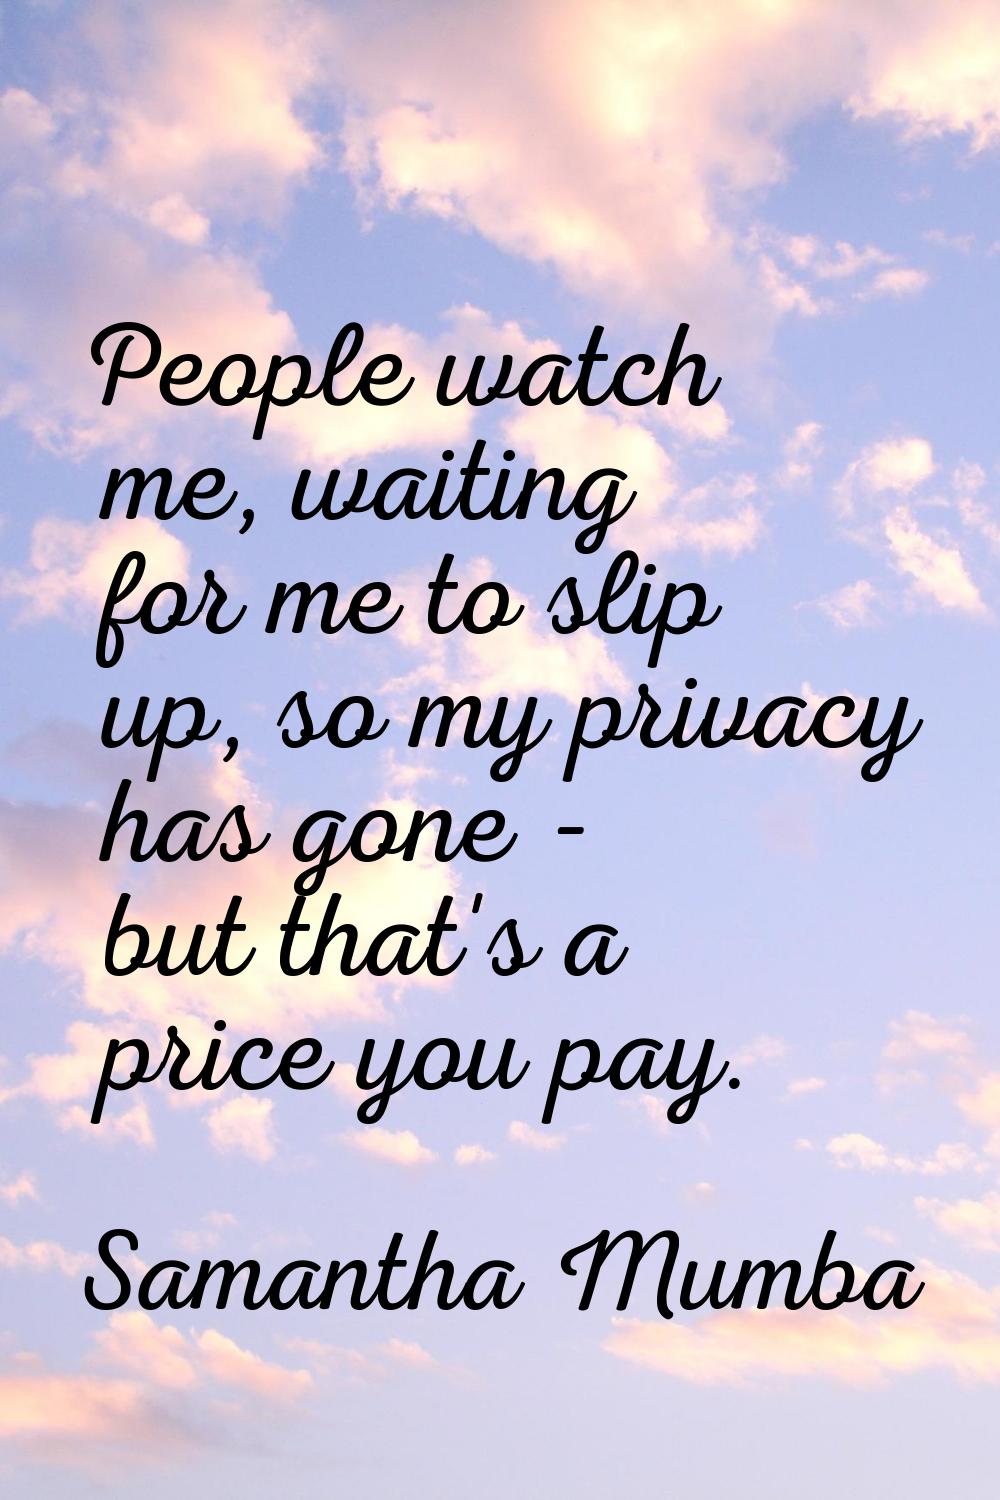 People watch me, waiting for me to slip up, so my privacy has gone - but that's a price you pay.